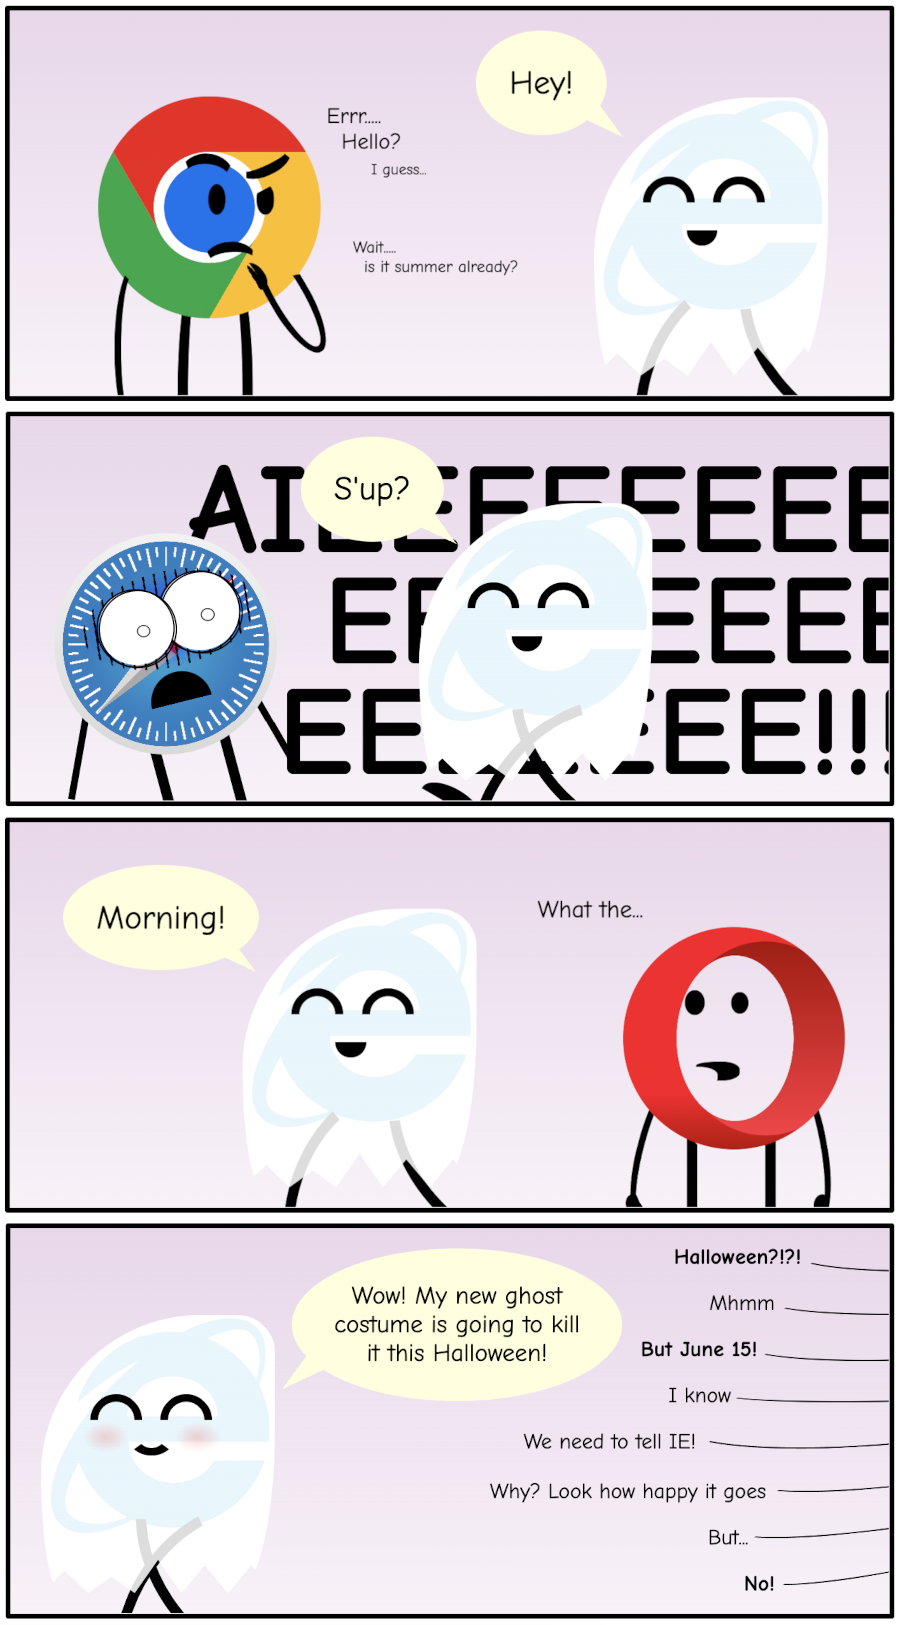 Comic strip with 4 panels. The first one shows the IE logo dressed up with a white blanket on top and saying 'Hey!' to a confused Chrome logo that says 'Errr.... hello?' and murmurs 'is it summer already?'. The second panel shows the IE logo saying 'sup?' to a scary-looking Safari logo yelling AIEEEE! In the third panel, the IE logo says 'morning' to the Opera logo that looks intrigued saying 'What the...'. In the final panel, the IE logo smiles happily saying 'Wow! my new ghost costume is going to kill it this Halloween', while a conversation happens off-panel: 'Halloween?', 'Mhmm', 'But June 15', 'I know', 'We need to tell IE', 'Why? Look how happy it is', 'But...', 'No!'